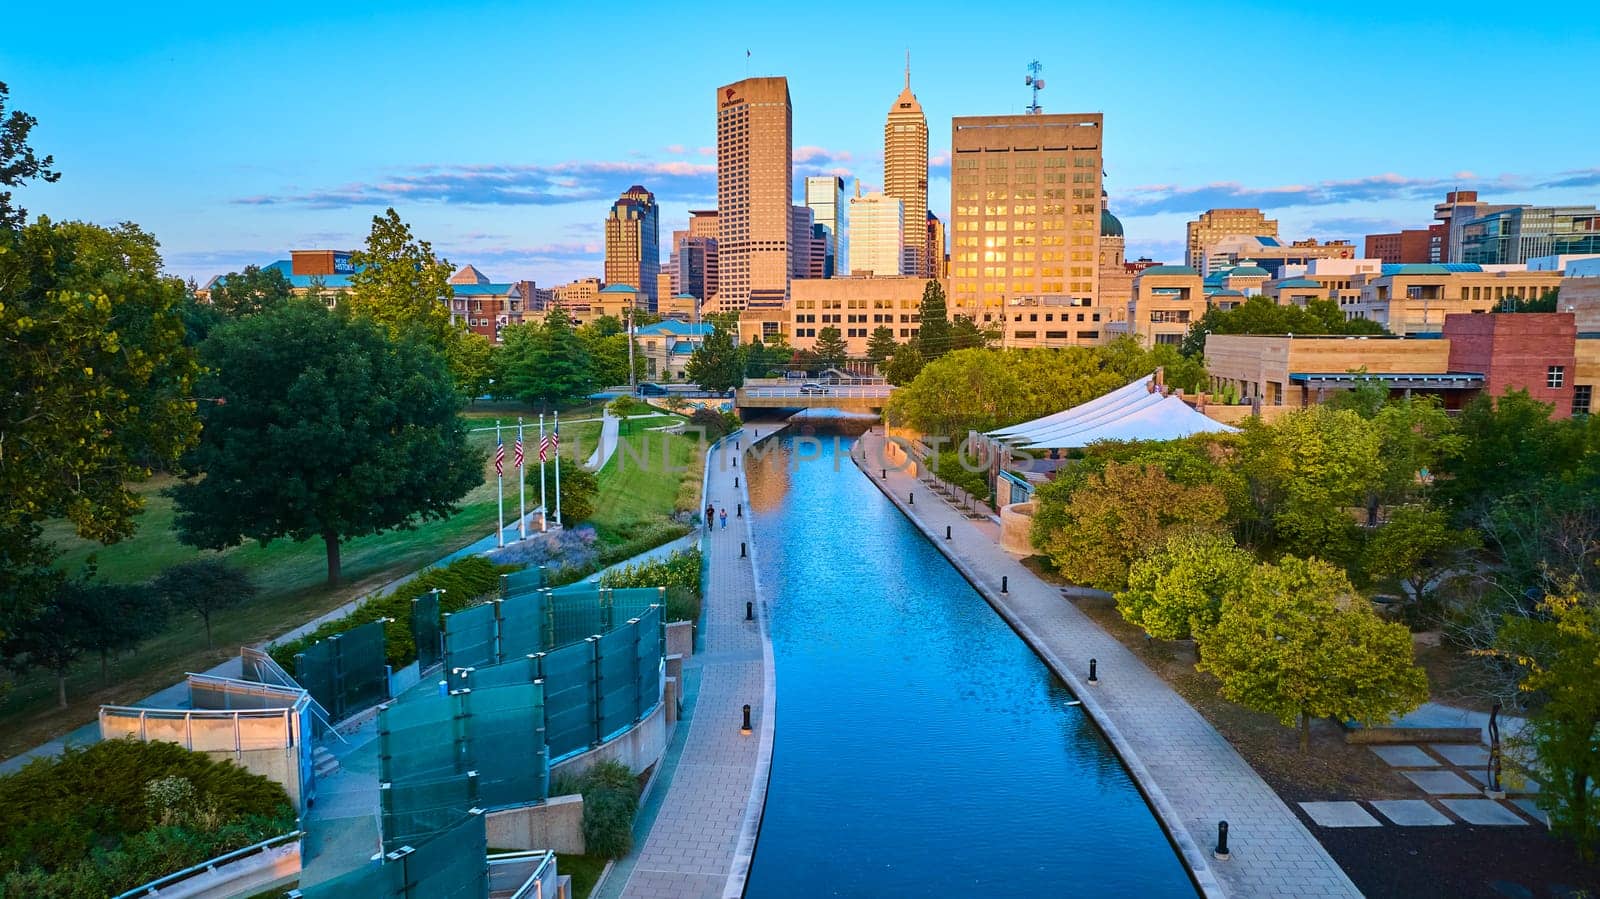 Golden hour over Indianapolis, showcasing serene river views, diverse architecture, and vibrant urban green spaces from an aerial perspective.